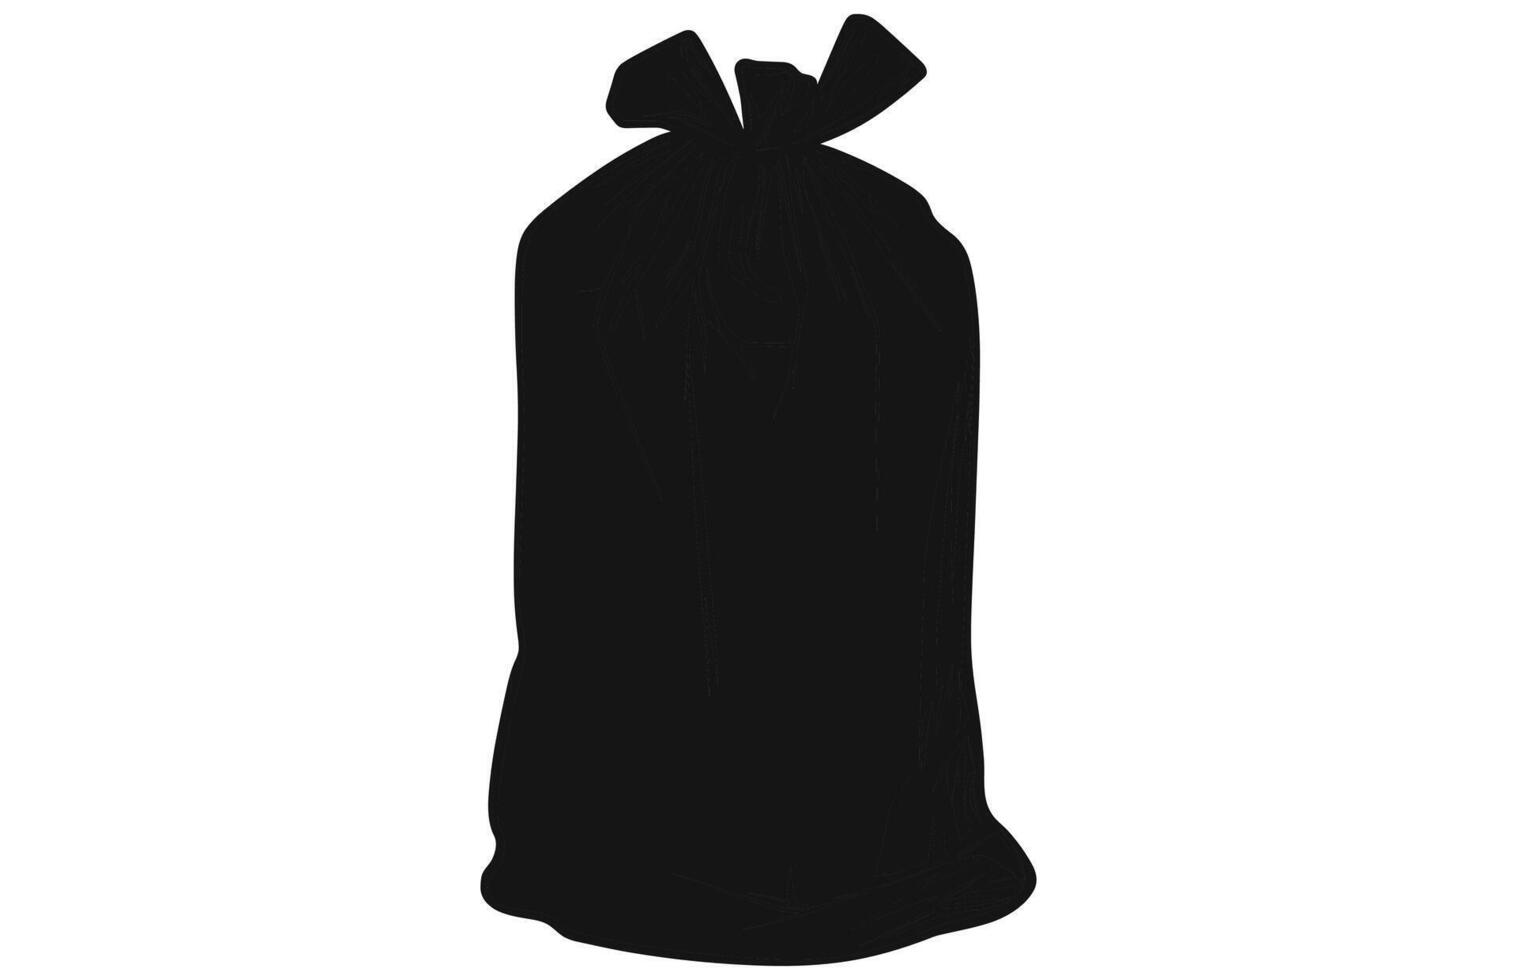 Rubbish bag silhouette icon,Packages with garbage vector illustration of big black plastic bags.